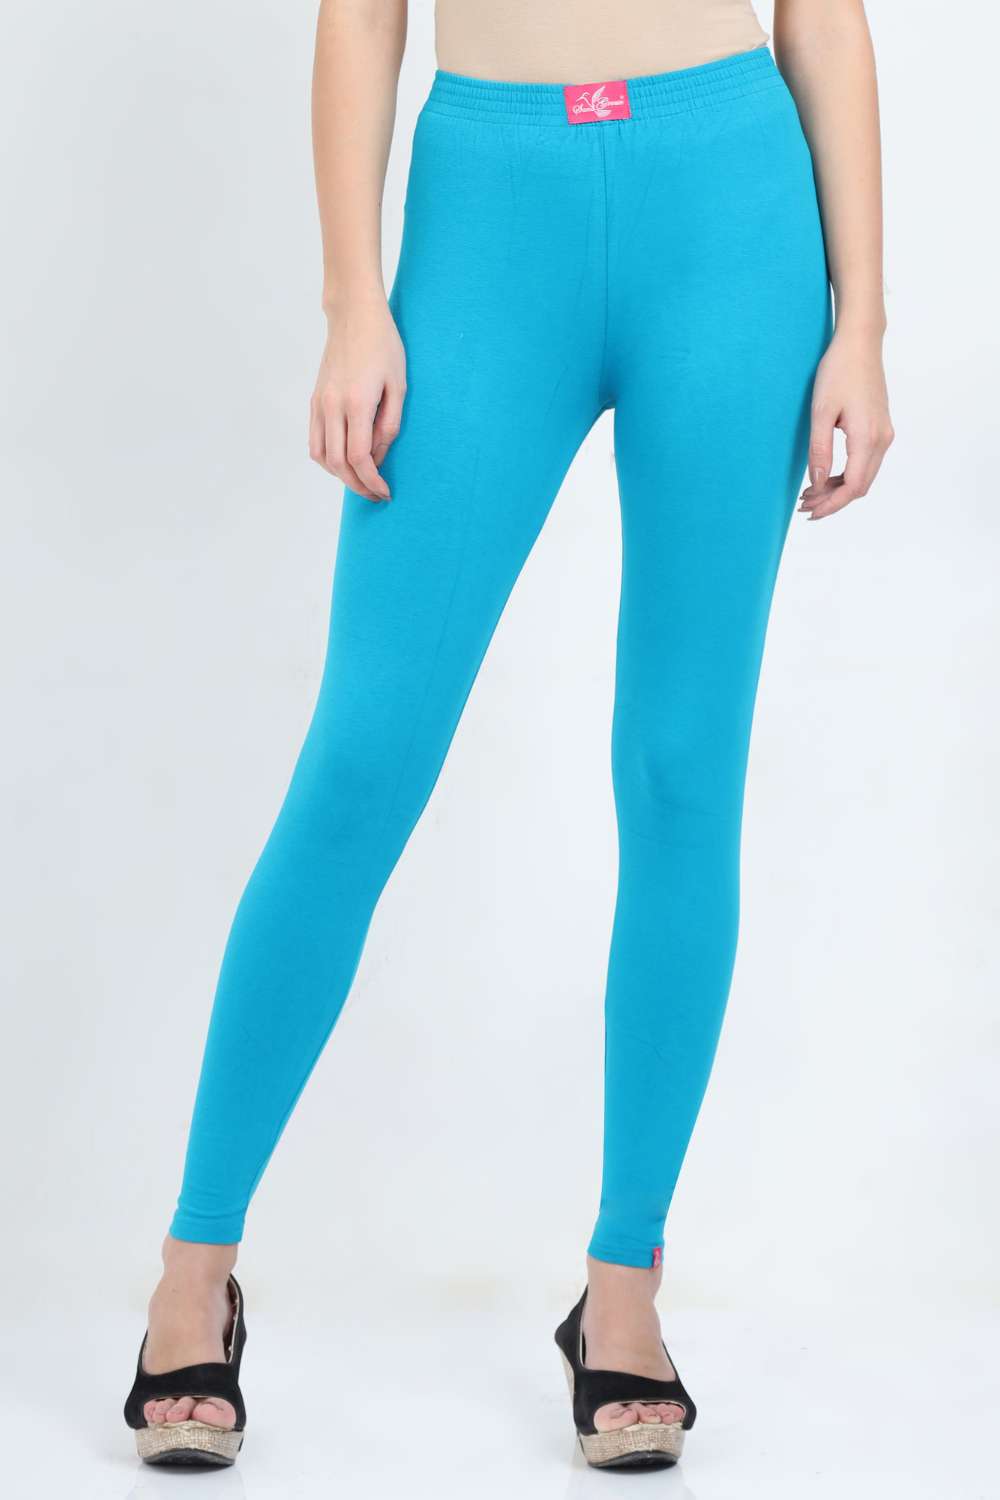 Indian Fancy And Most Flexible Cotton Yellow Colored Leggings at Best Price  in Ahmednagar | Disha Enterprises